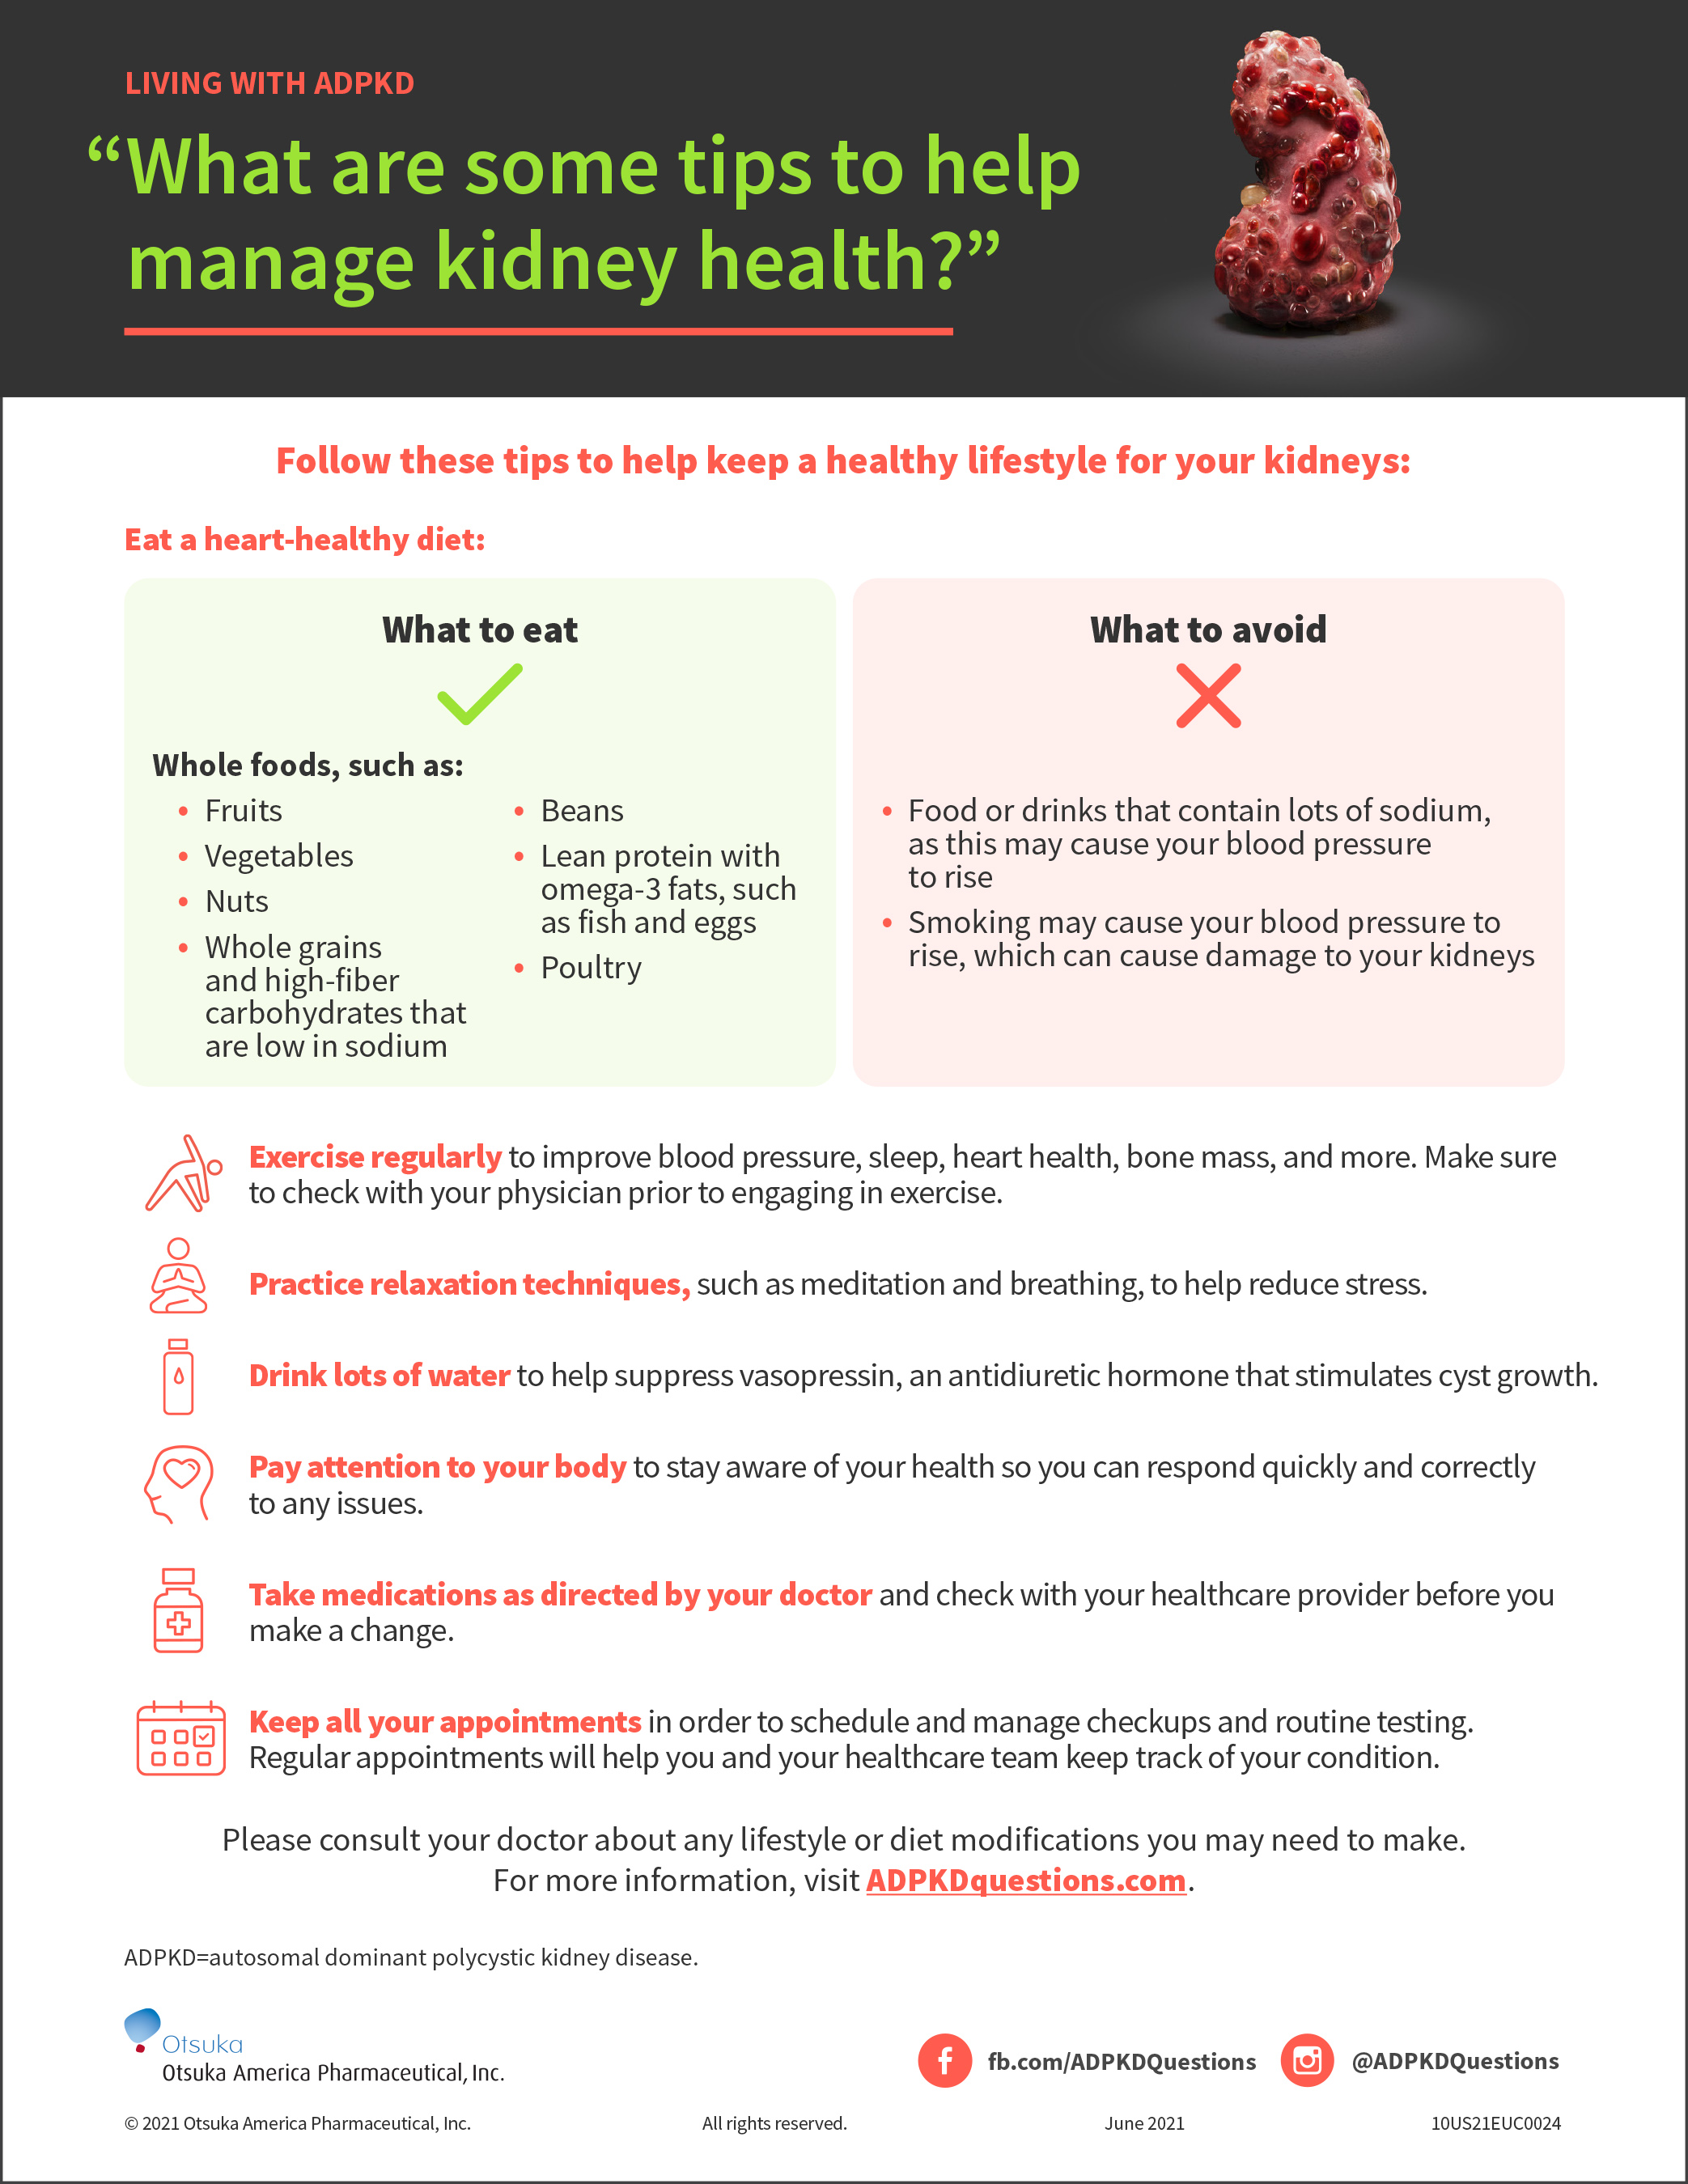 “What are some tips to help manage kidney health?”